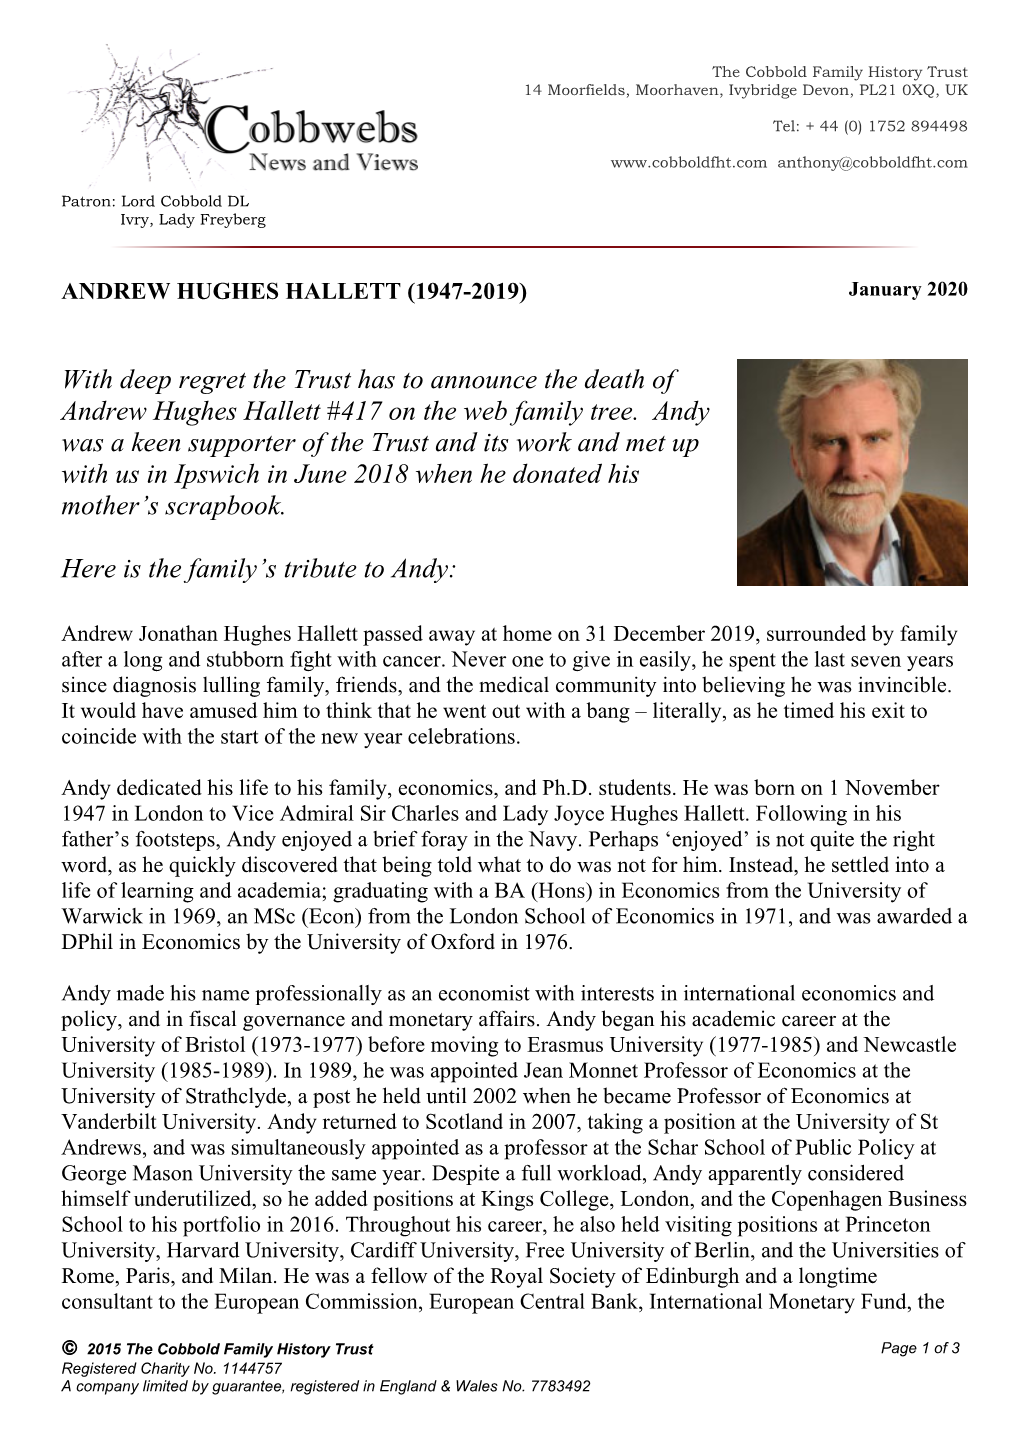 With Deep Regret the Trust Has to Announce the Death of Andrew Hughes Hallett #417 on the Web Family Tree